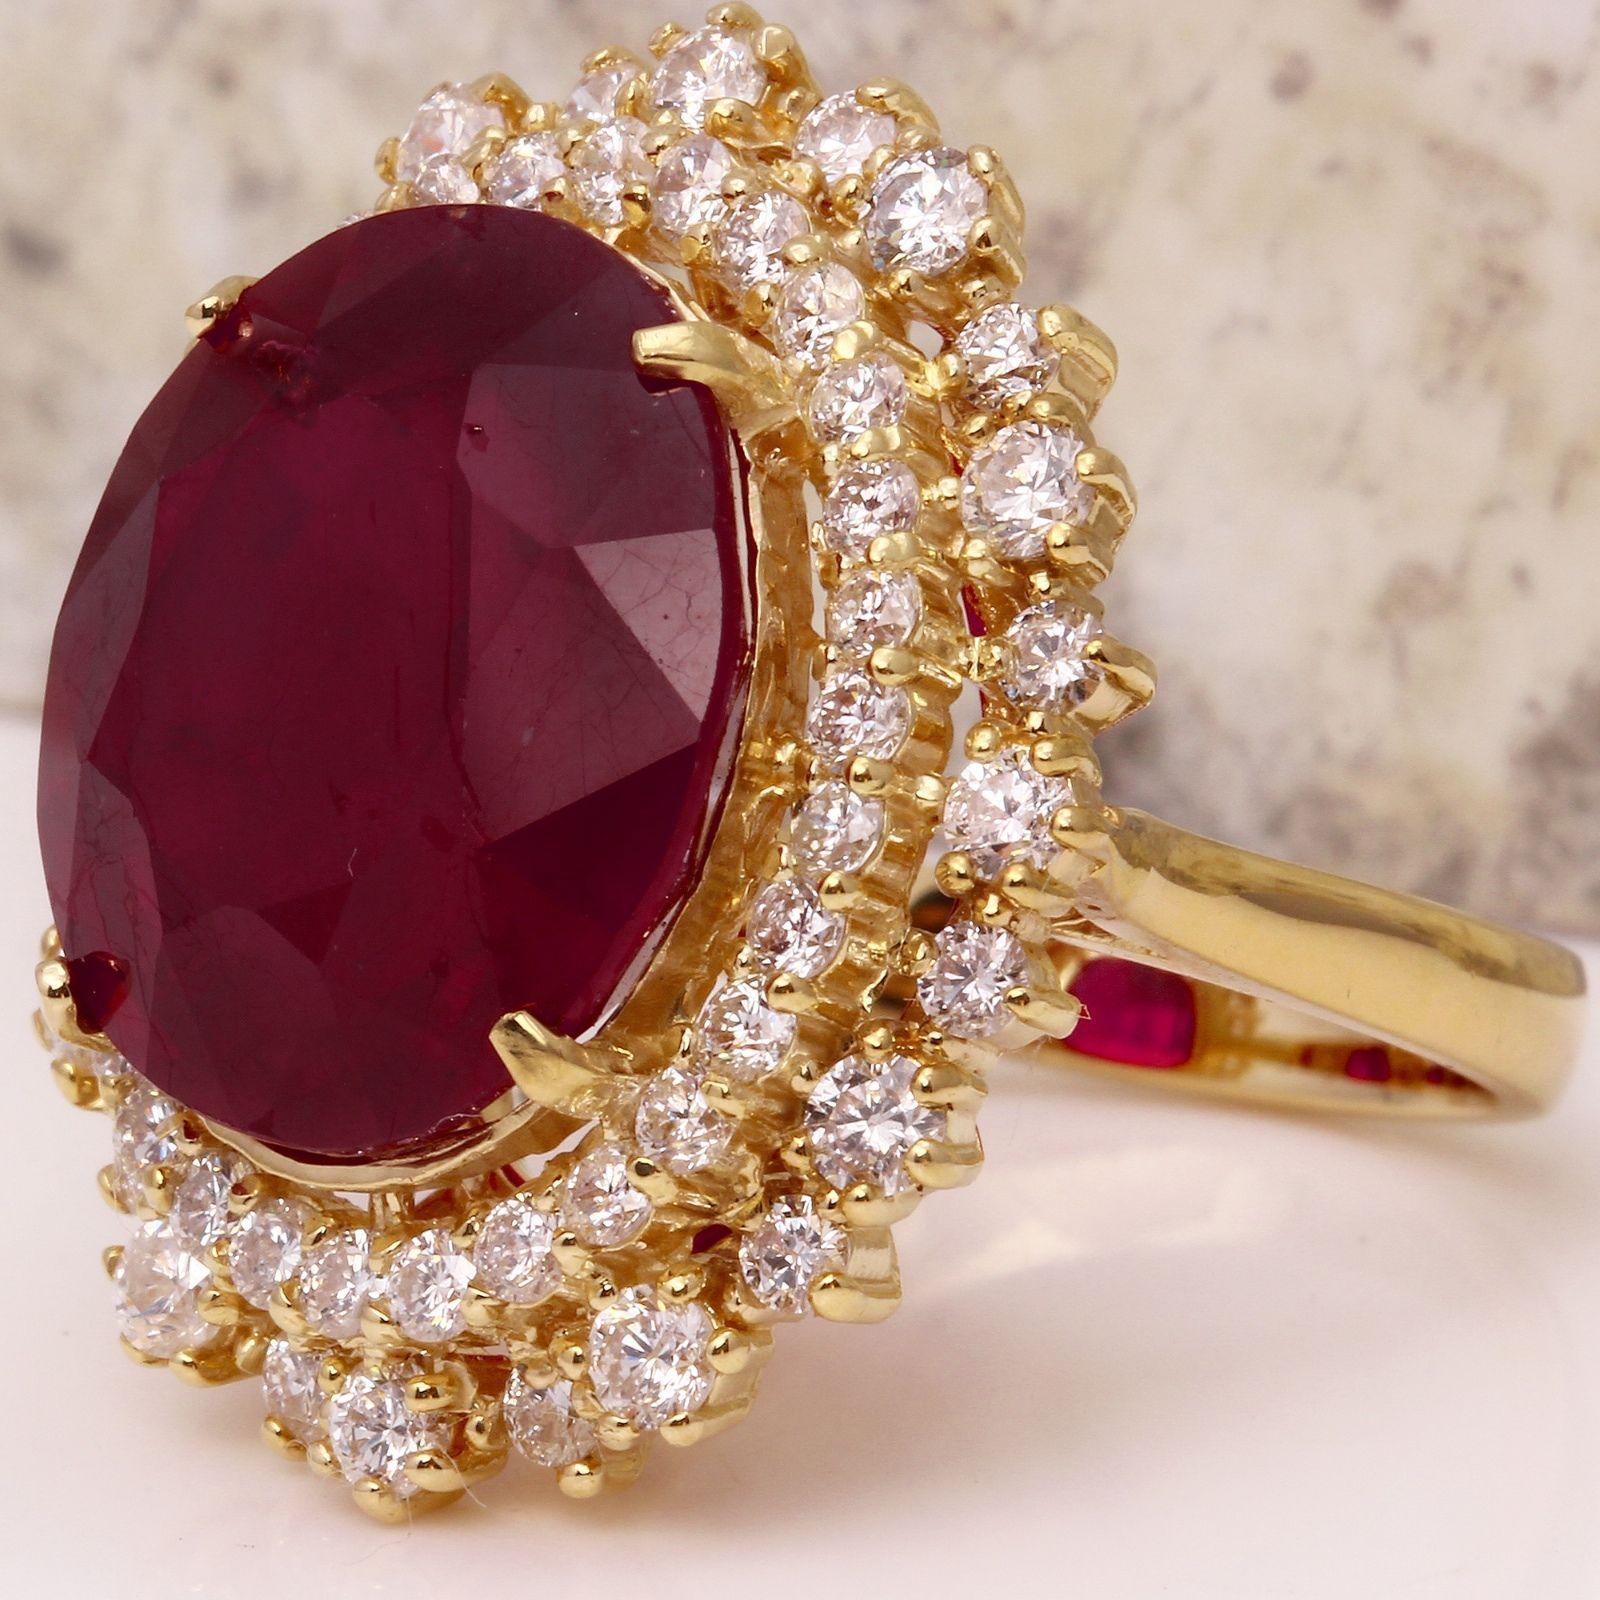 19.26 Carats Impressive Red Ruby and Diamond 14K Yellow Gold Ring

Total Red Ruby Weight is: 17.36 Carats (glass-filled)

Ruby Measures: 15.74 x 13.96mm

Natural Round Diamonds Weight: 1.90 Carats (color G / Clarity VS2-SI1)

Ring size: 6.5 (we